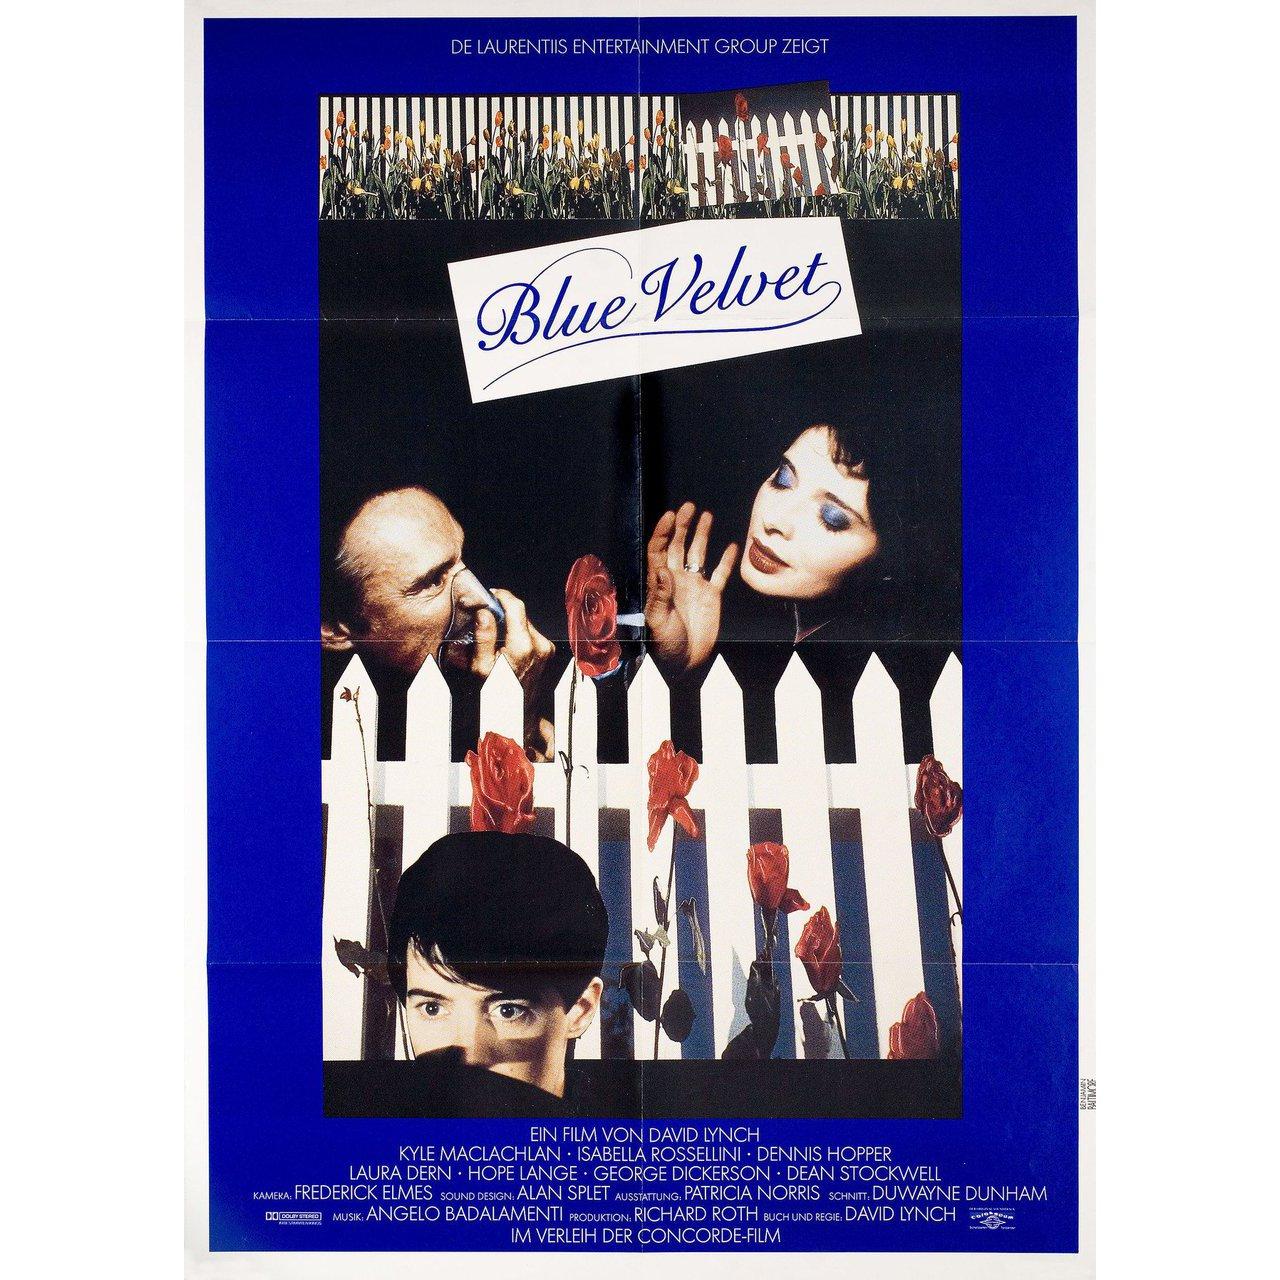 Original 1986 German A1 poster for the film Blue Velvet directed by David Lynch with Isabella Rossellini / Kyle MacLachlan / Dennis Hopper / Laura Dern. Fine condition, folded. Many original posters were issued folded or were subsequently folded.